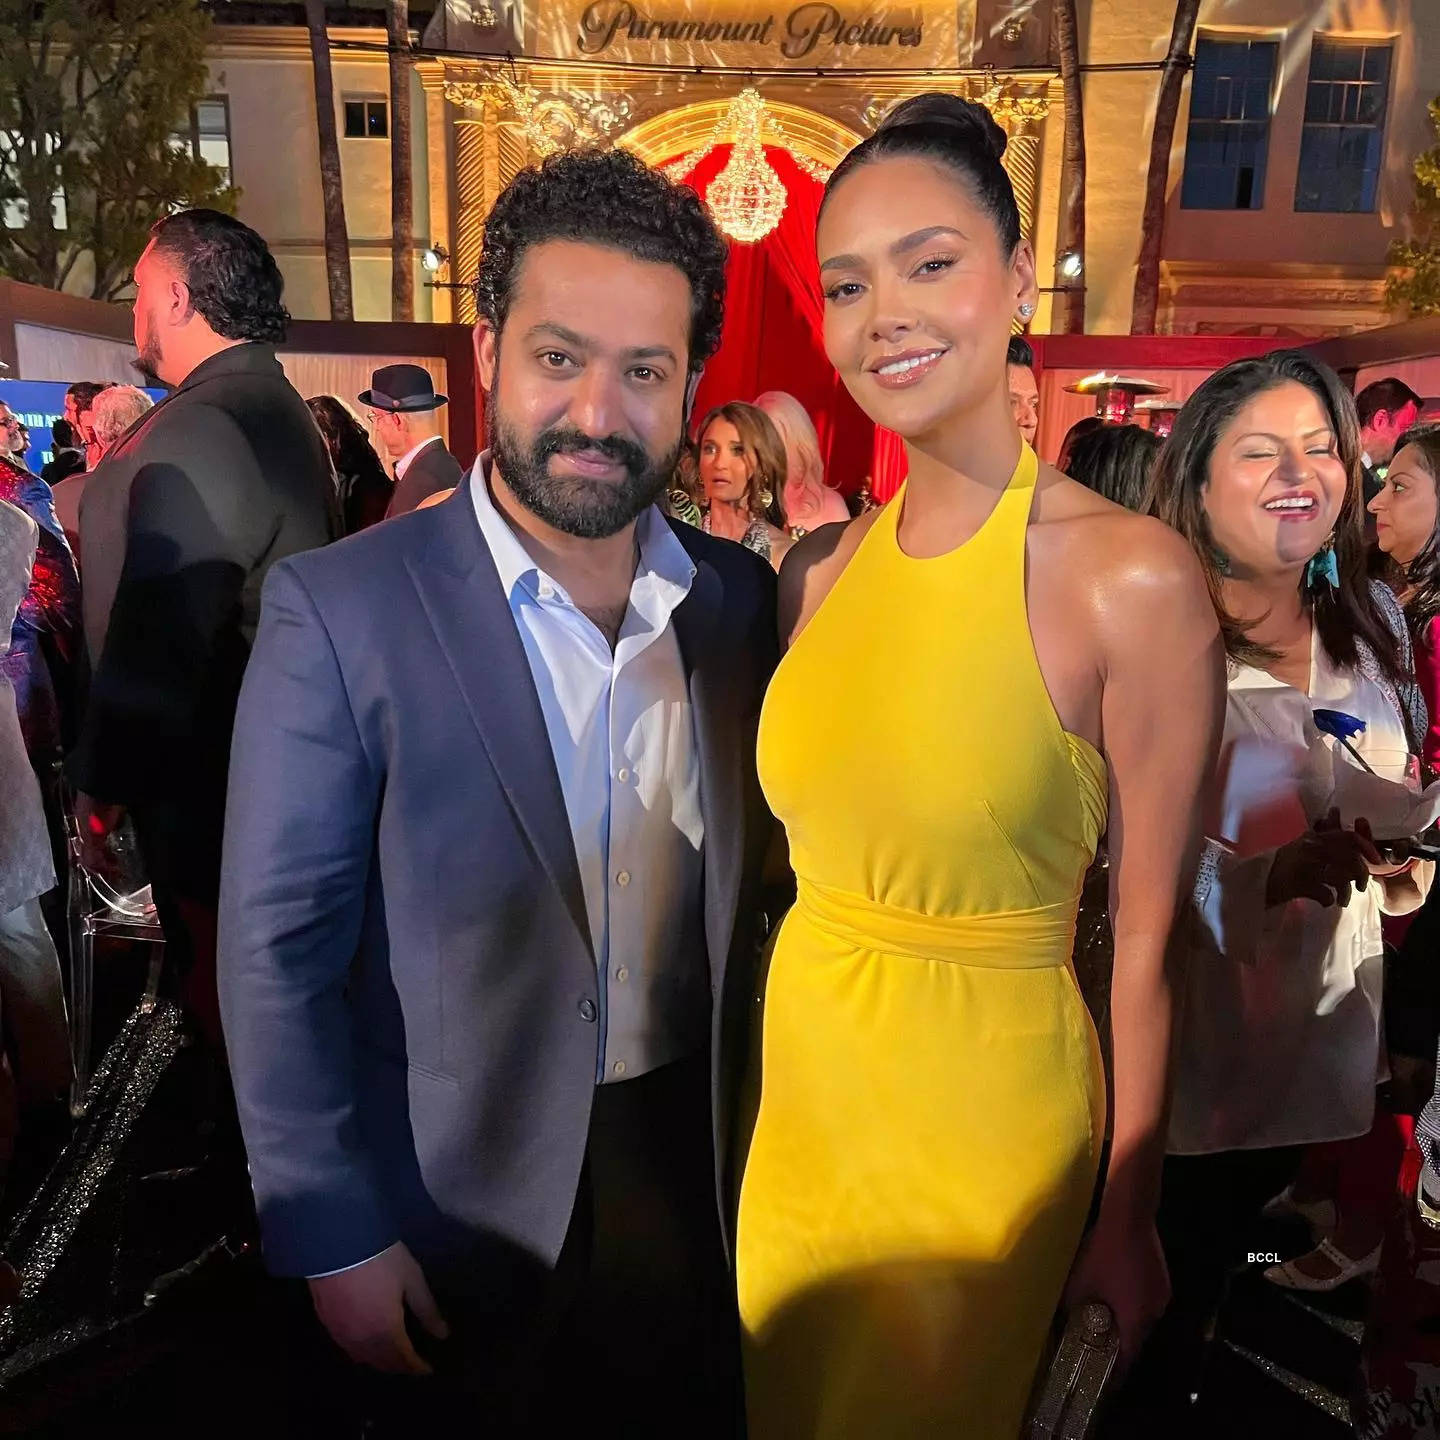 Oscars 2023: Esha Gupta steals the show in a bodycon gown as she poses with Jr NTR, Ram Charan at Priyanka Chopra’s party